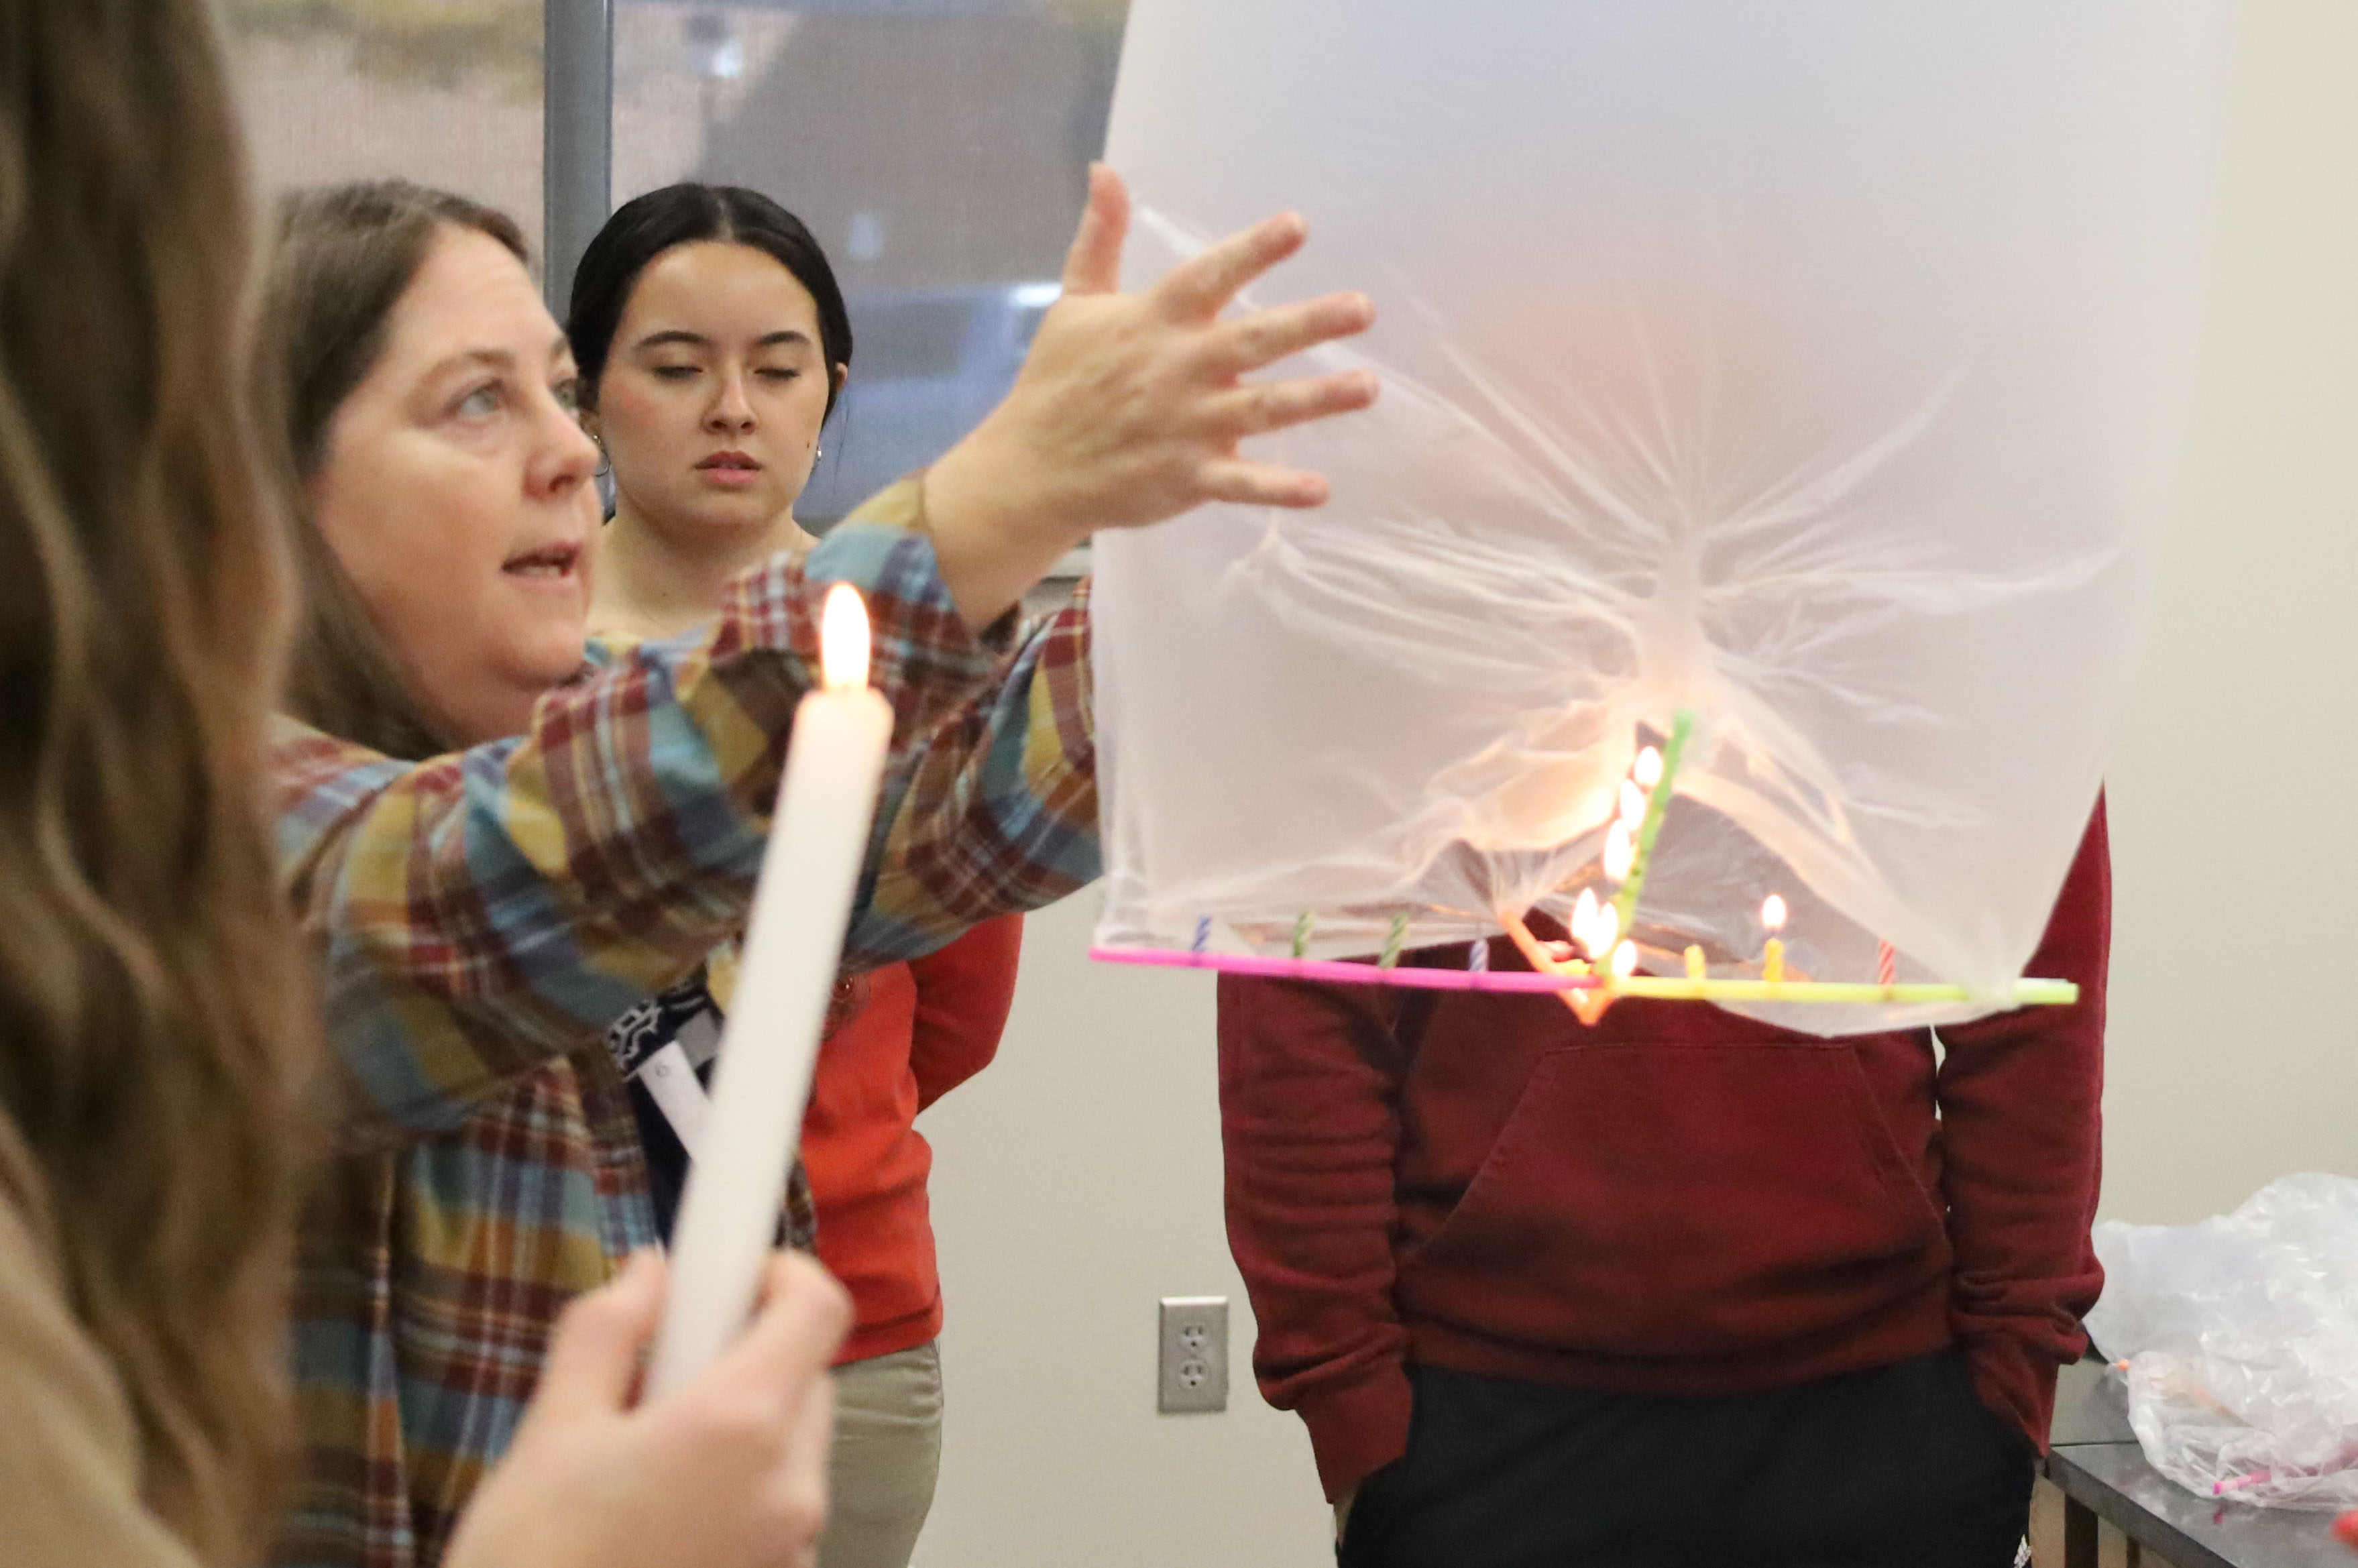 Hot air balloon lab elevates learning for physics students